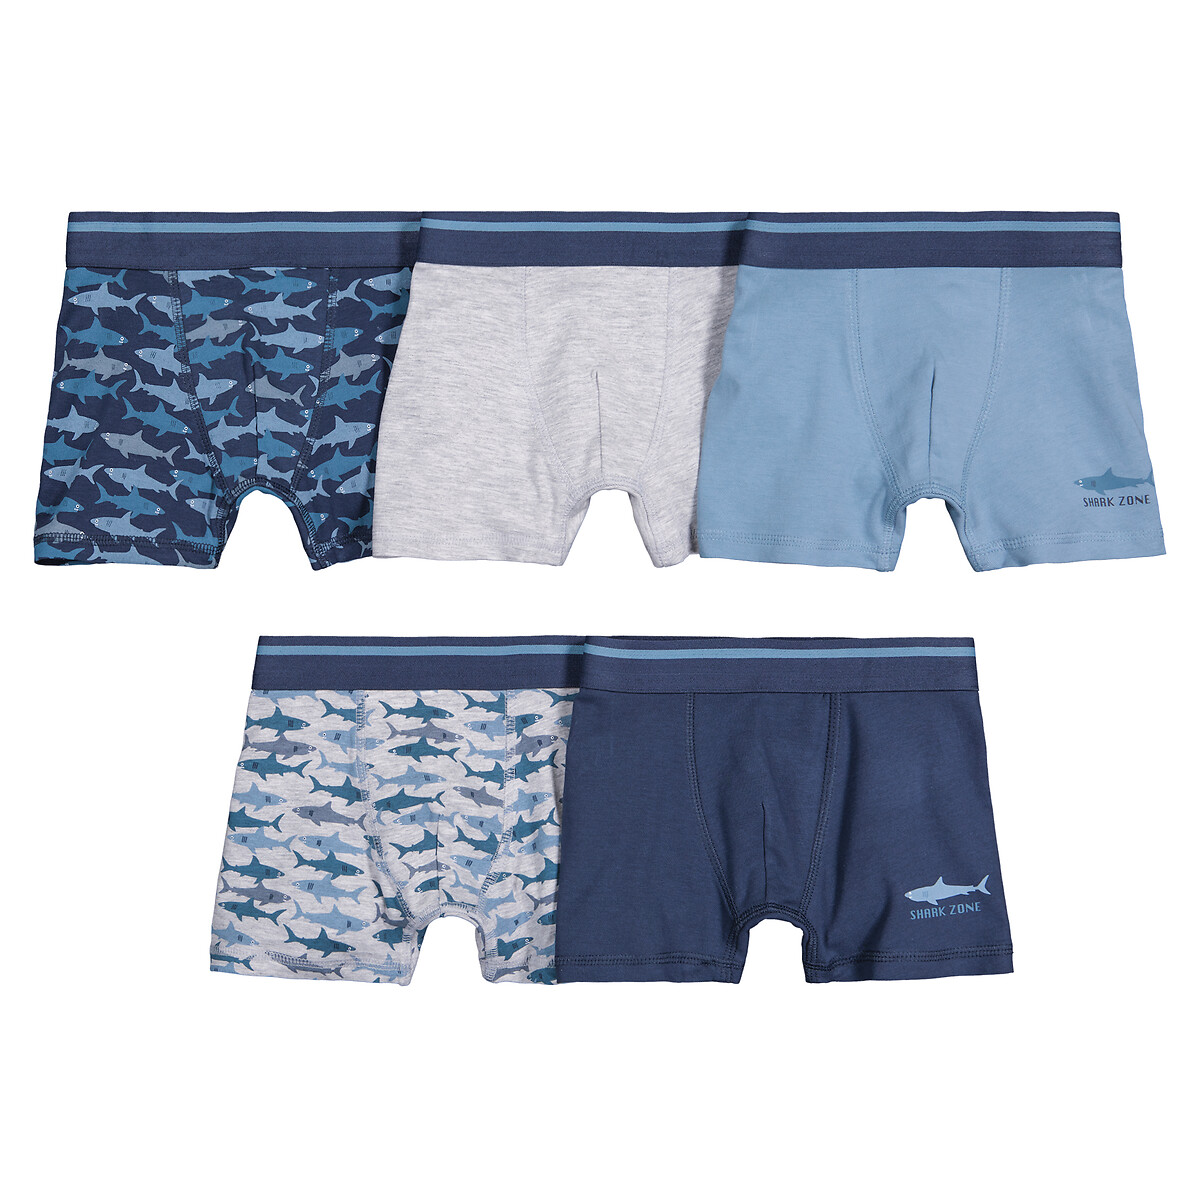 Pack of 5 Boxers in Shark Print Cotton